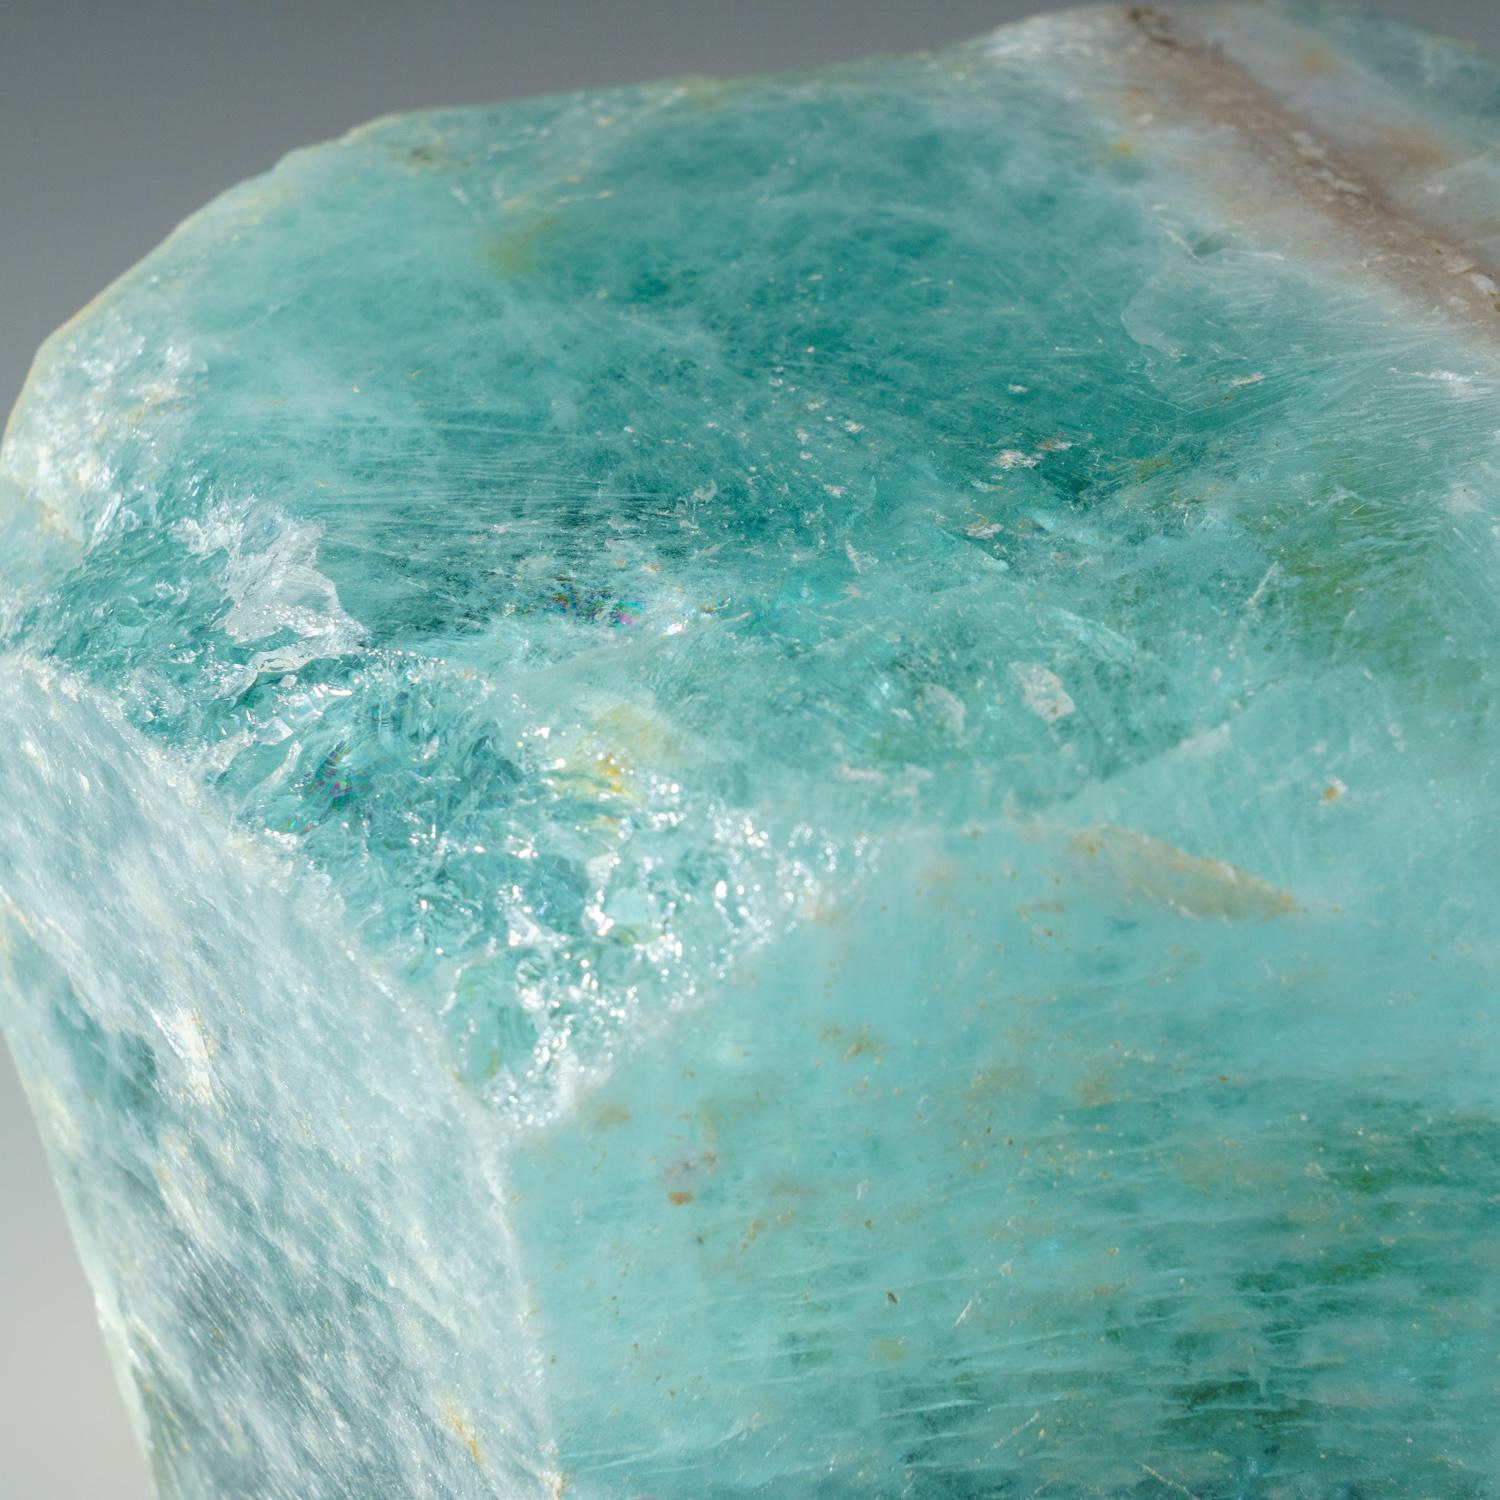 From Linópolis, Divino das Laranjeiras, Minas Gerais, Brazil

Museum quality, large partial crystal of lustrous transparent-to-translucent aquamarine, the blue gem variety of the mineral species beryl, with internal sections that are gemmy and could